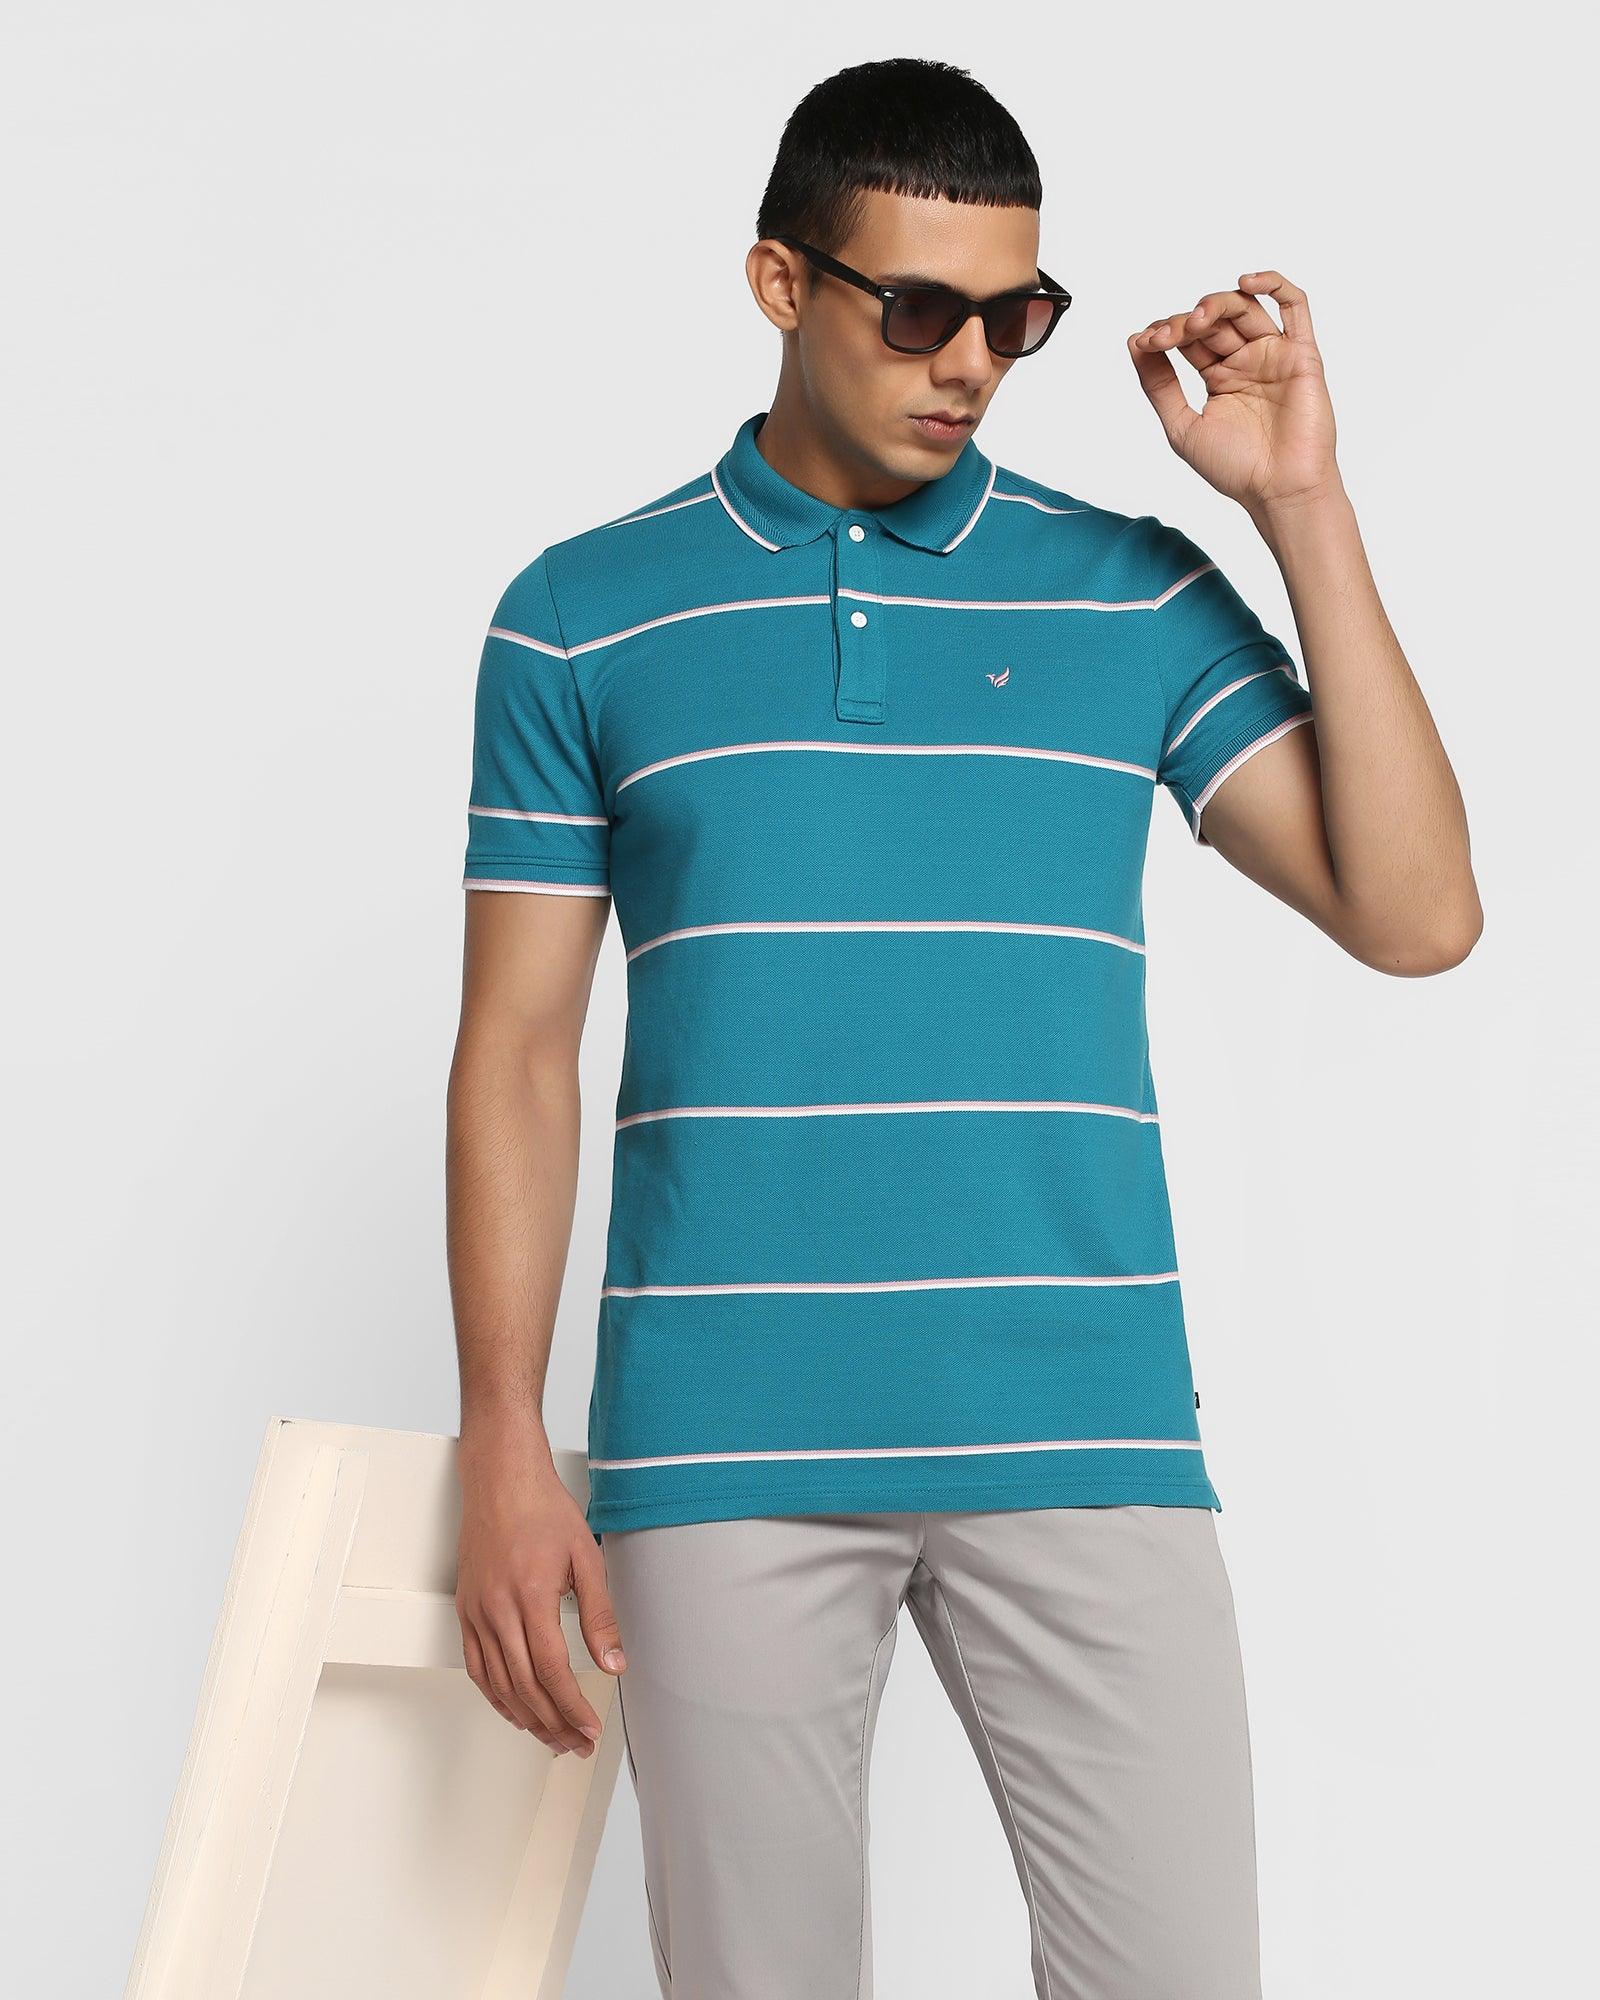 Polo Electric Blue Striped T Shirt - Vertical